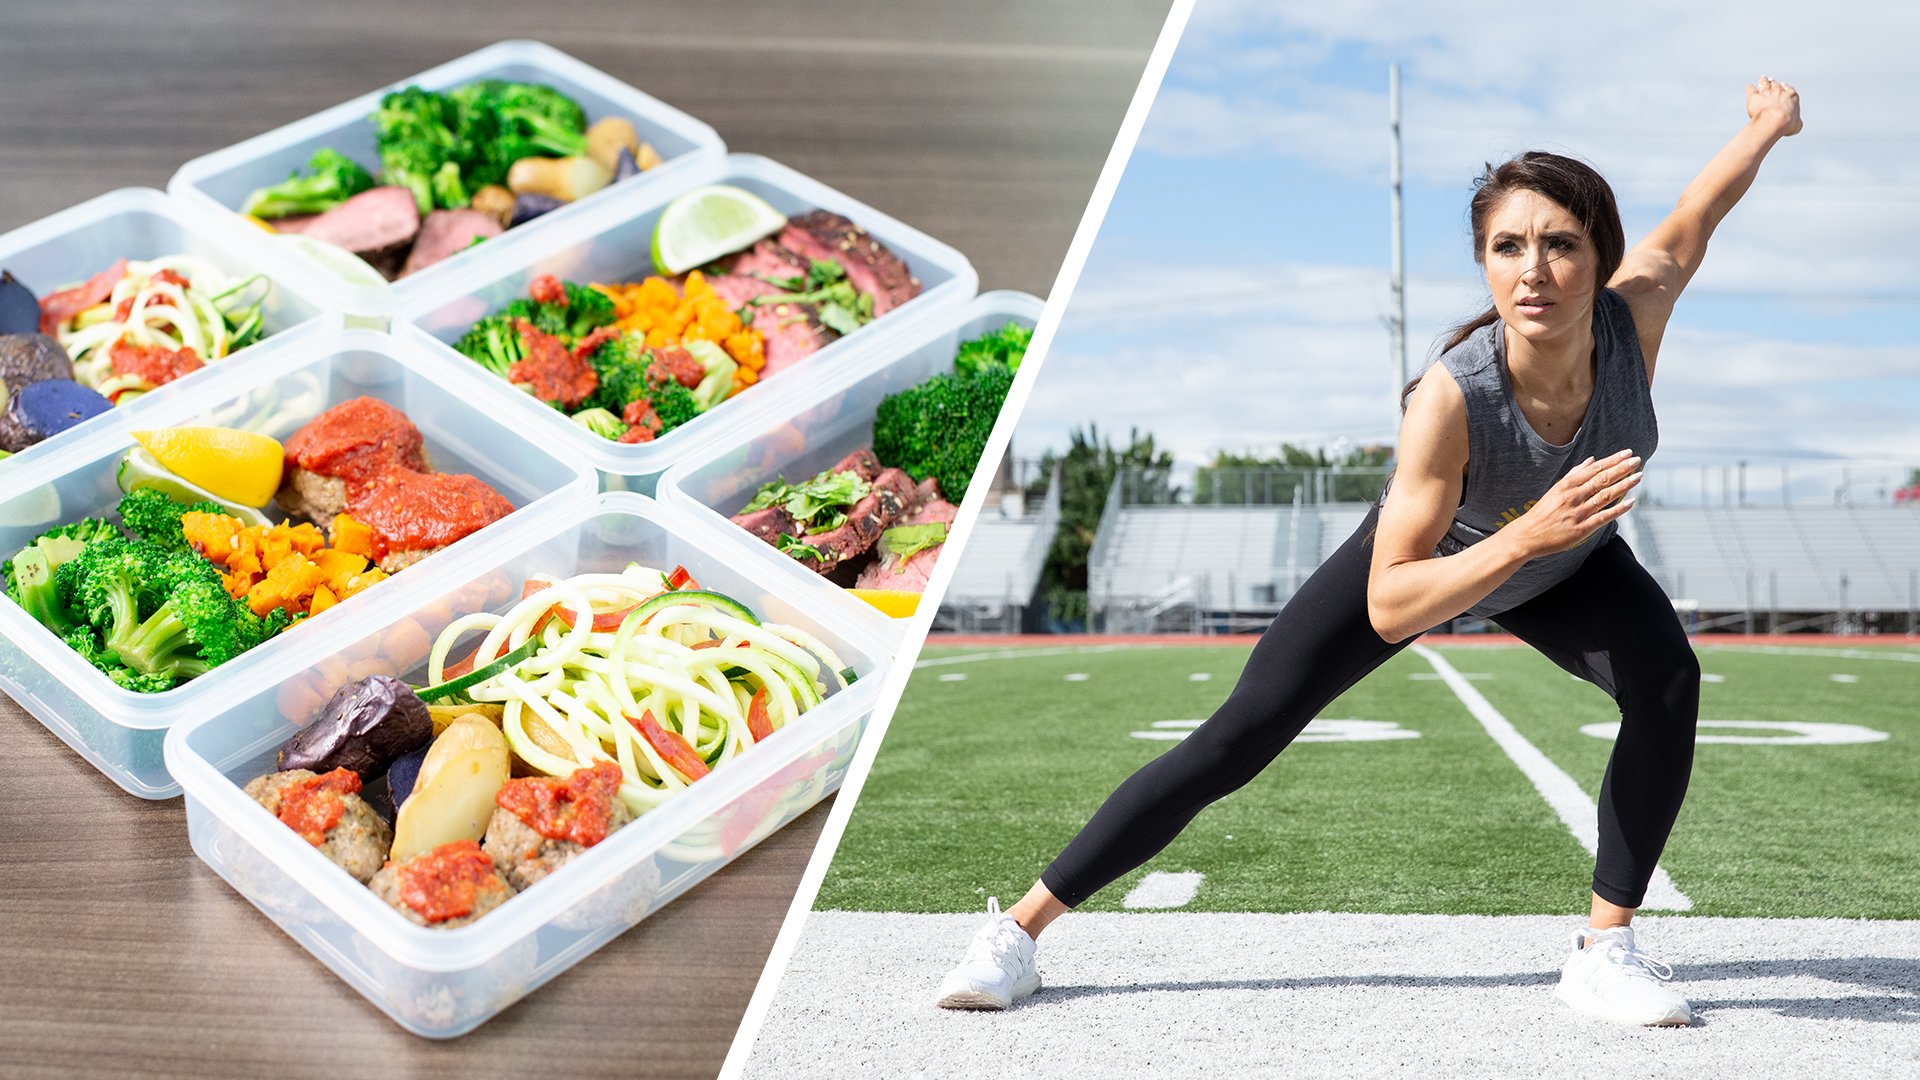 How To Lose Weight: Meal Plans, Macro Nutrition, and Exercise